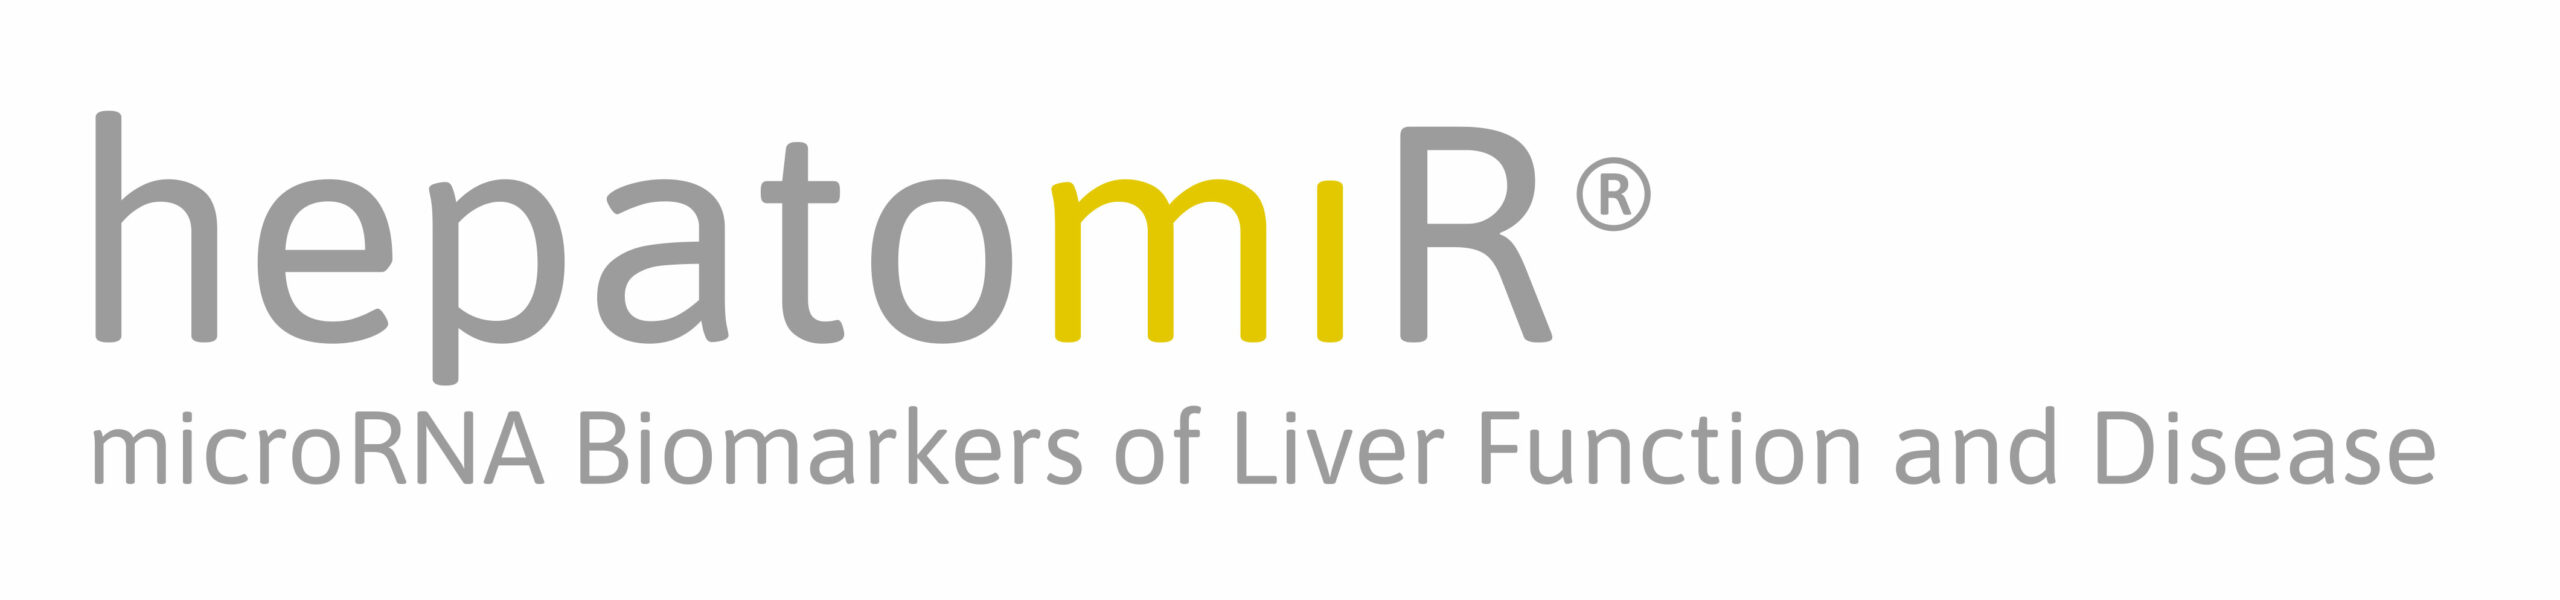 microRNA Biomarkers of Liver Function and Disease